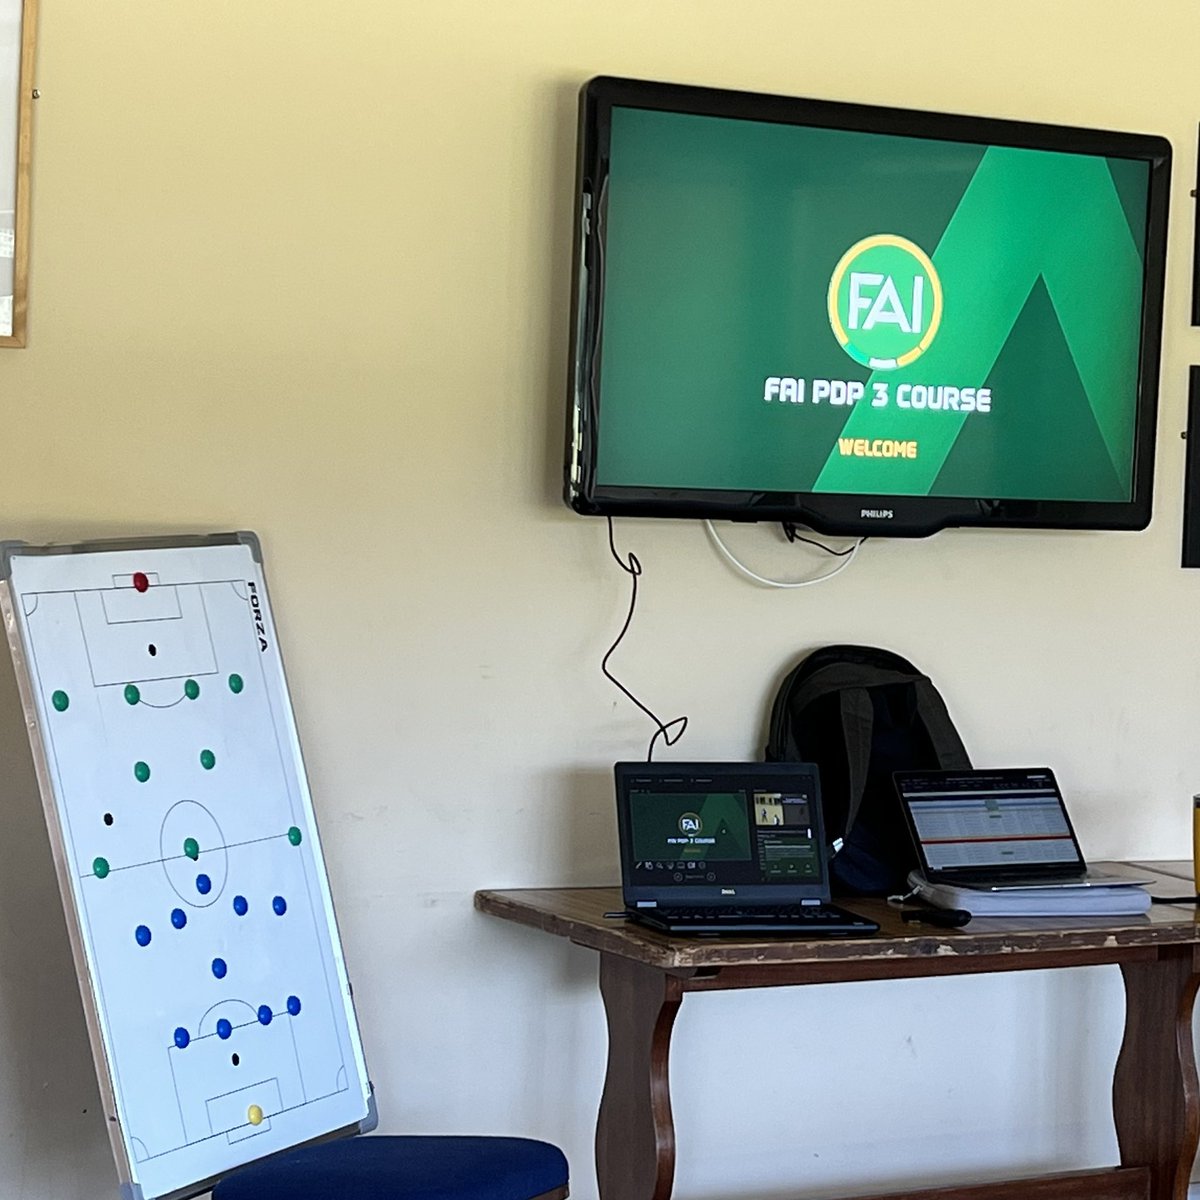 𝘾𝙤𝙖𝙘𝙝 𝙀𝙙𝙪𝙘𝙖𝙩𝙞𝙤𝙣 ⚽️🎓

All set up and ready to go for this mornings @FAICoachEd #PDP3 in Aughrim Rangers

#realitybasedlearning 
#lifelonglearning 
#learnercentered